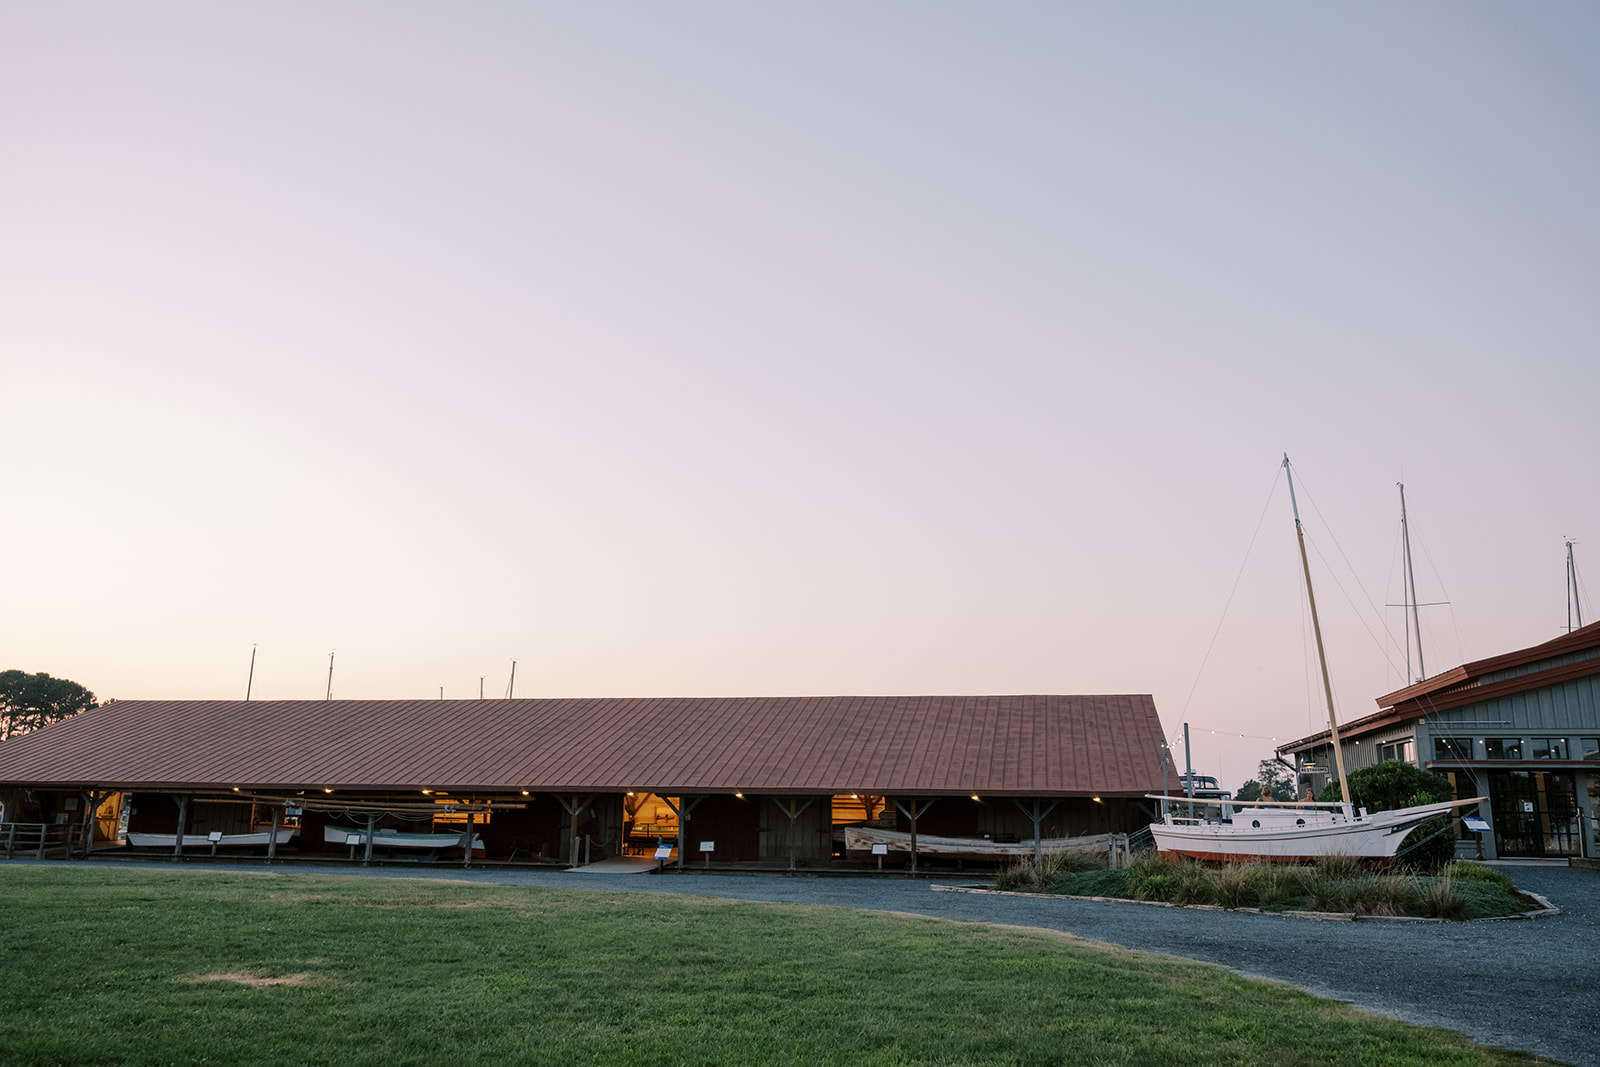 chesapeake bay maritime museum boat house for weddings and cocktail hours